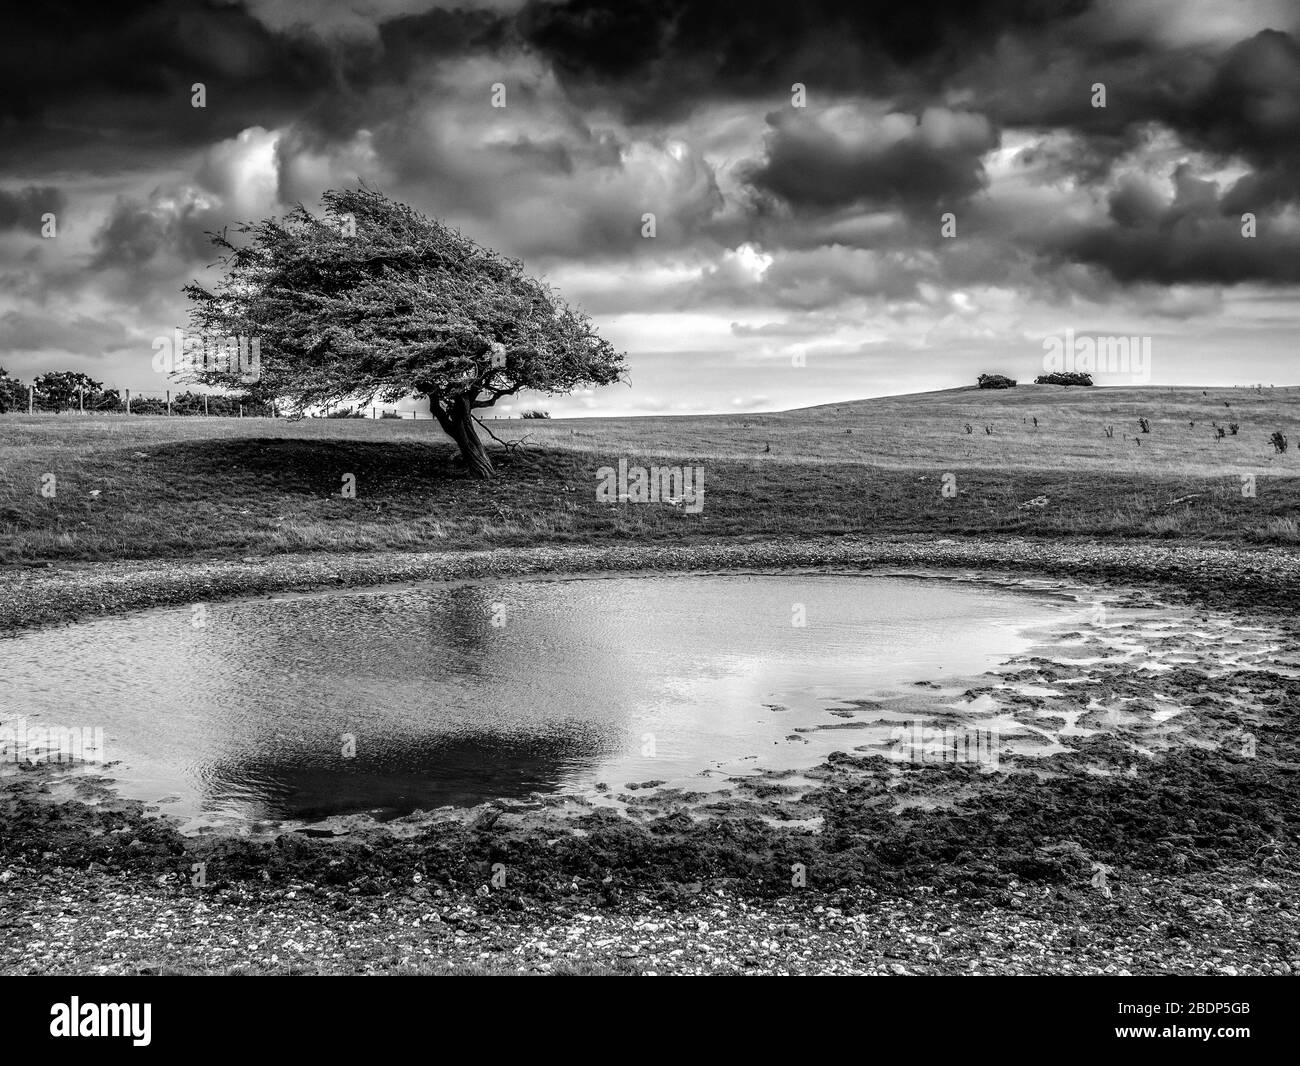 Landscape in Black and white with wind swept tree in the background Stock Photo